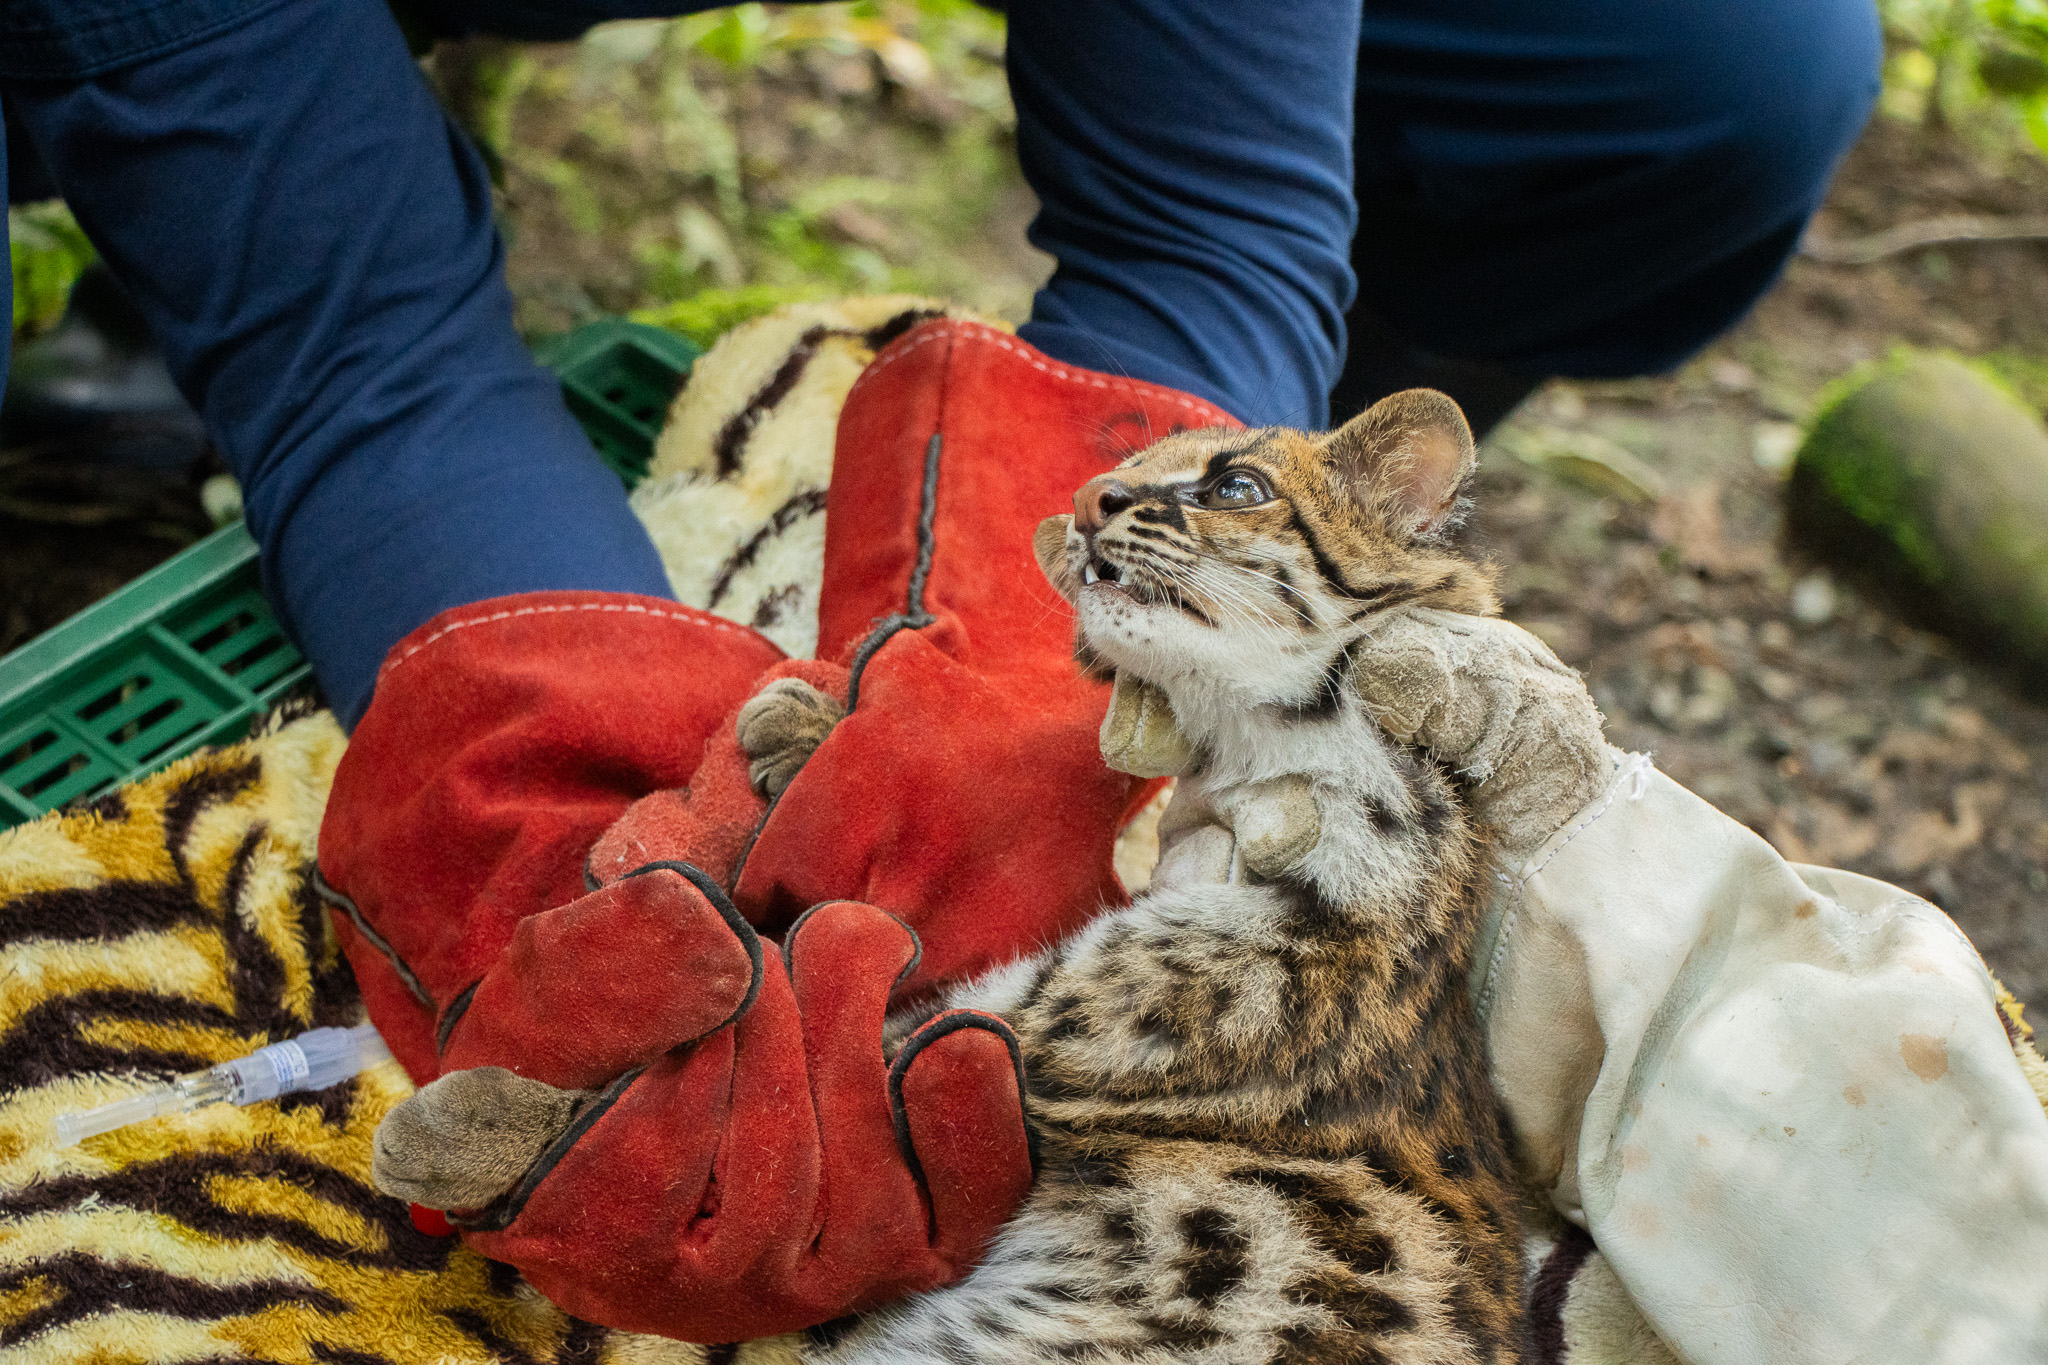 The captured margay that returned to freedom - 247sports News